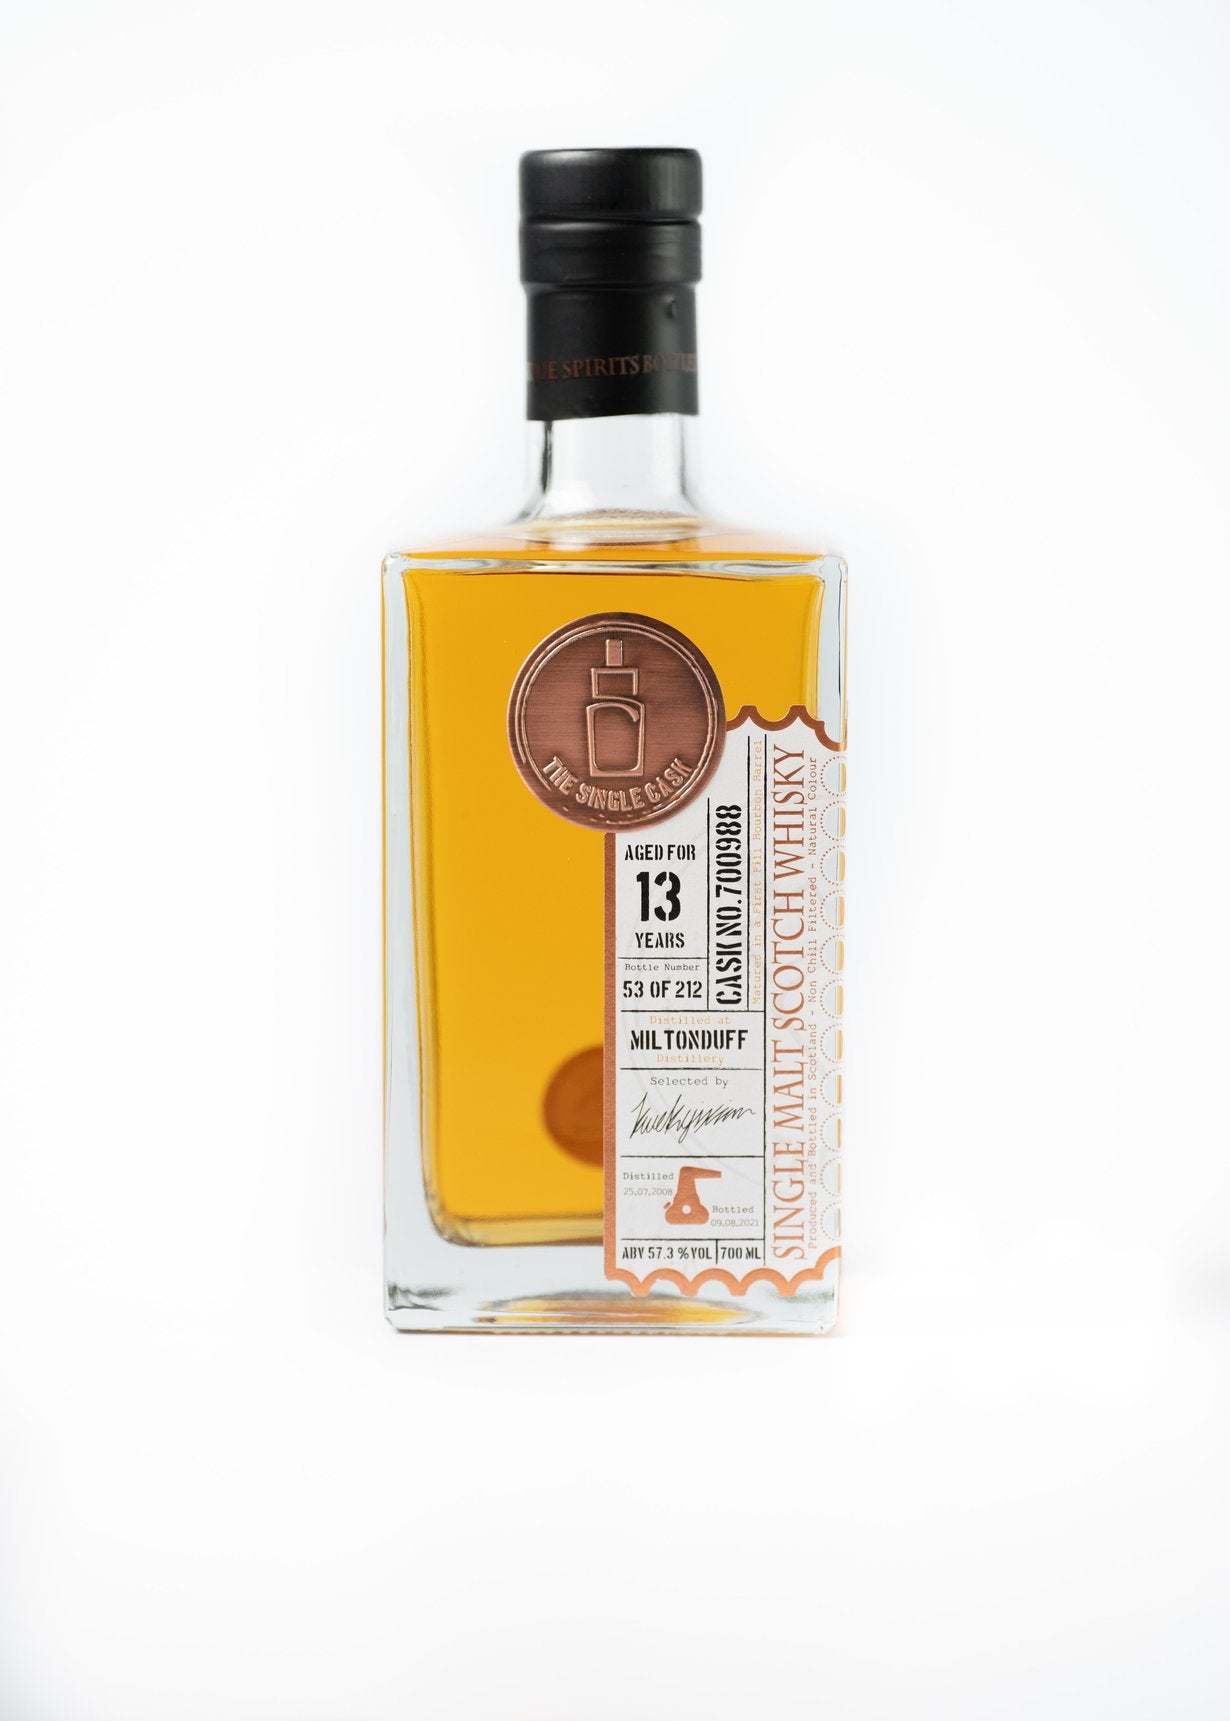 13 years old Miltonduff scotch whisky by The Single Cask